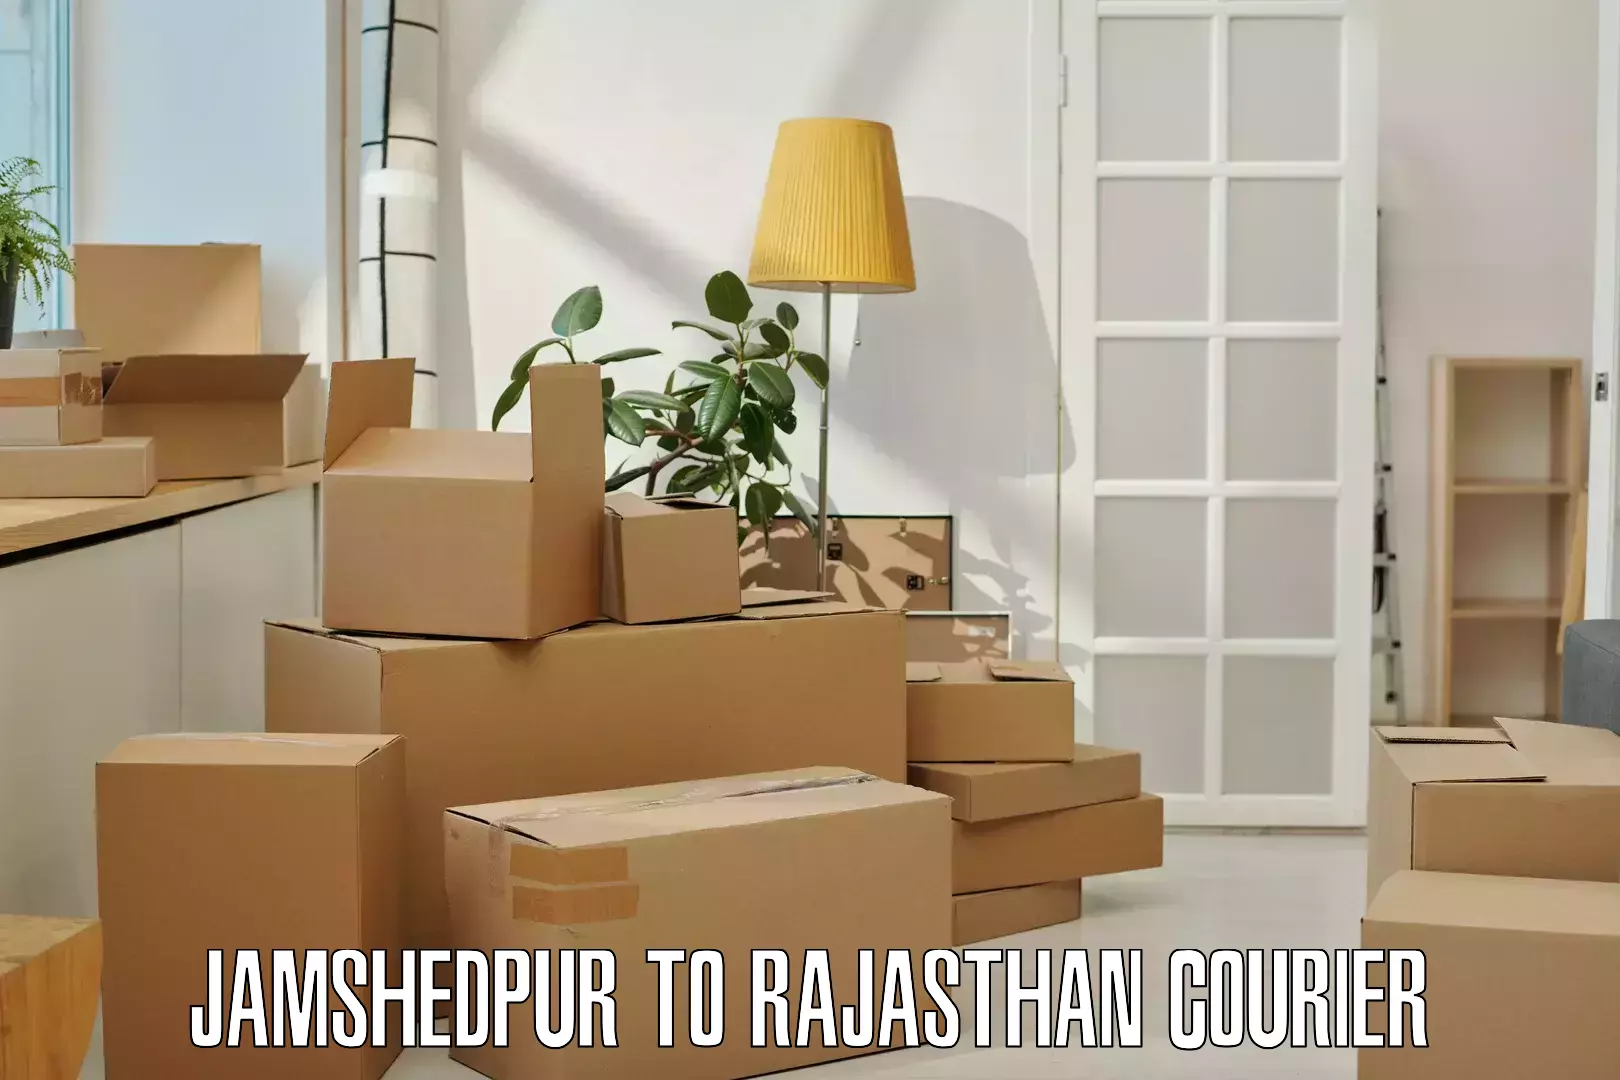 Next-day delivery options Jamshedpur to Banswara